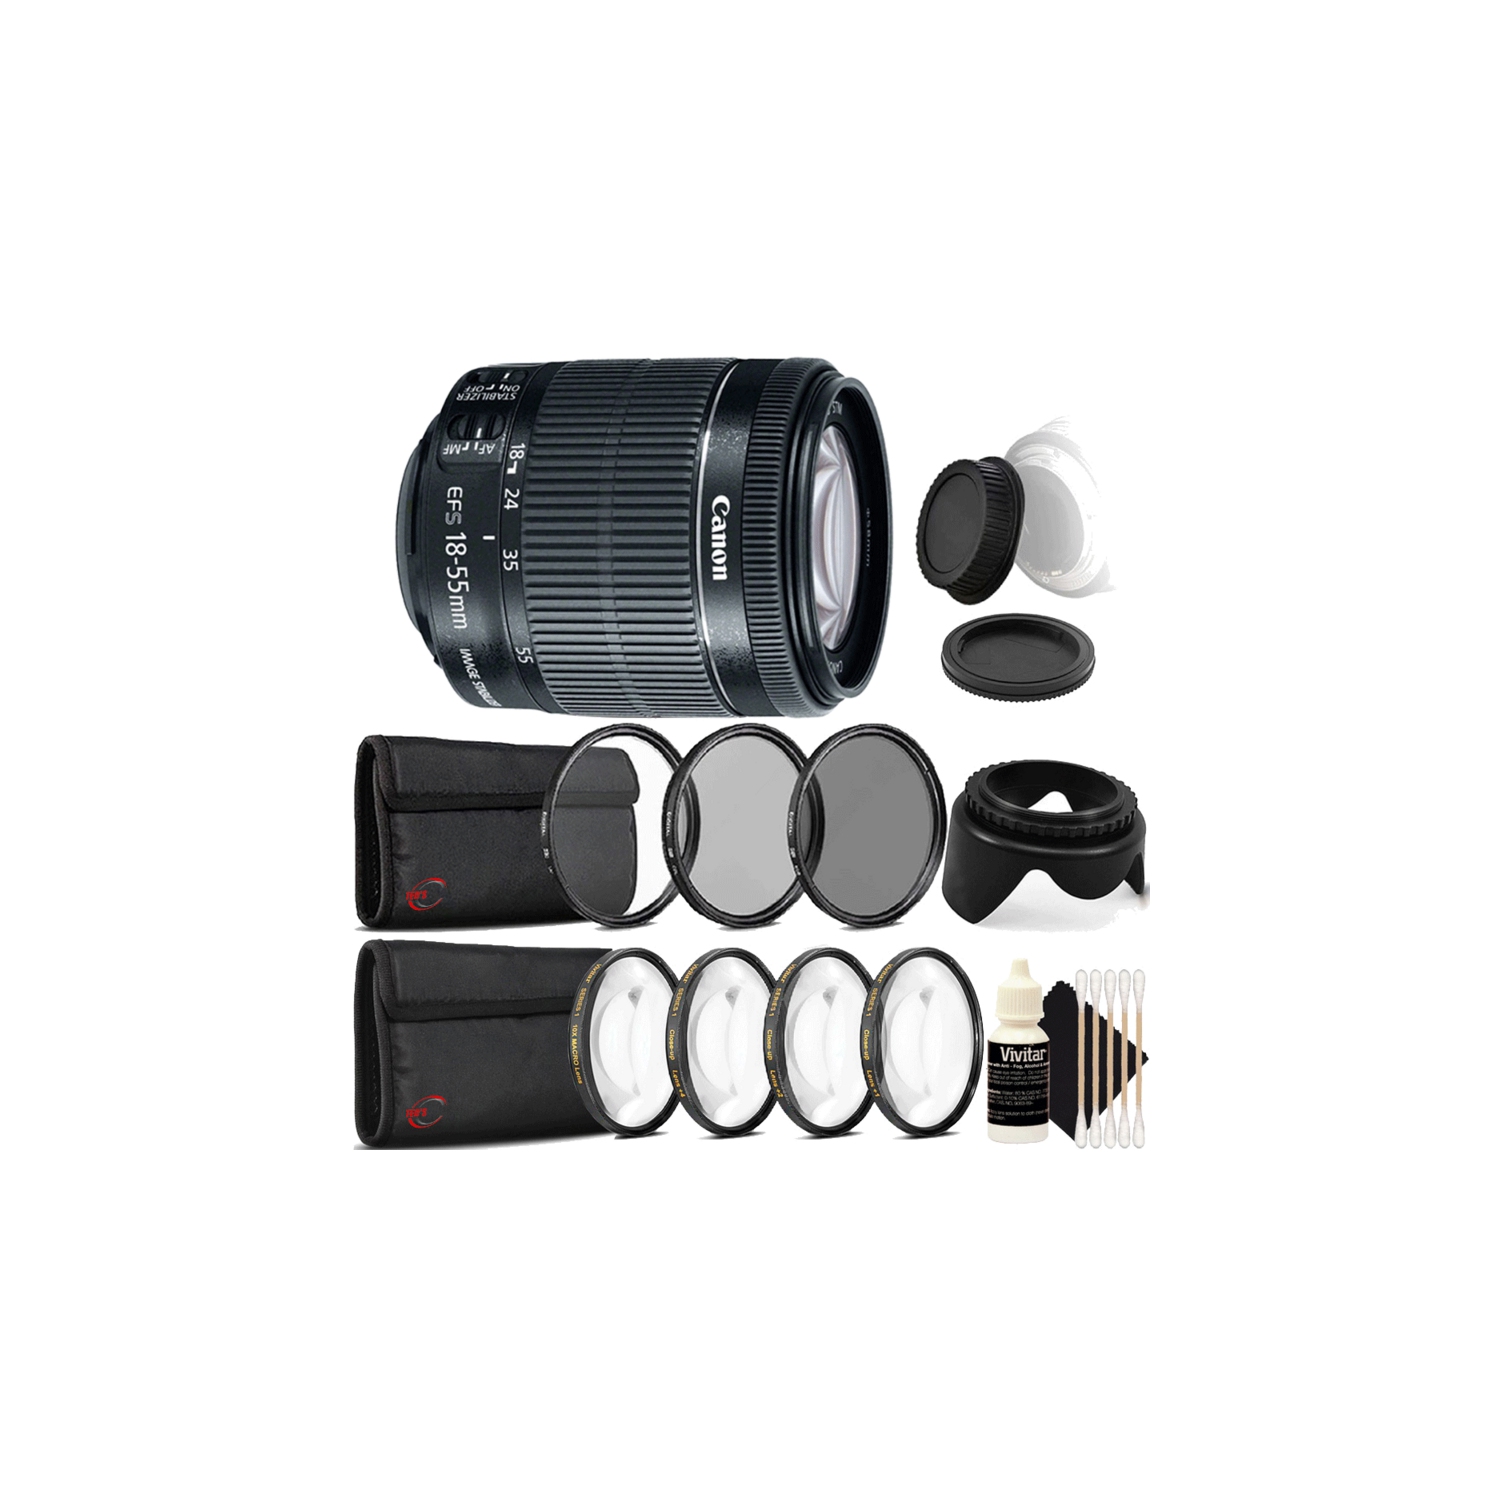 Canon EF-S 18-55mm f/3.5-5.6 IS STM Lens with Kit For Canon 80D and 1300D - International Version w/Seller Warranty